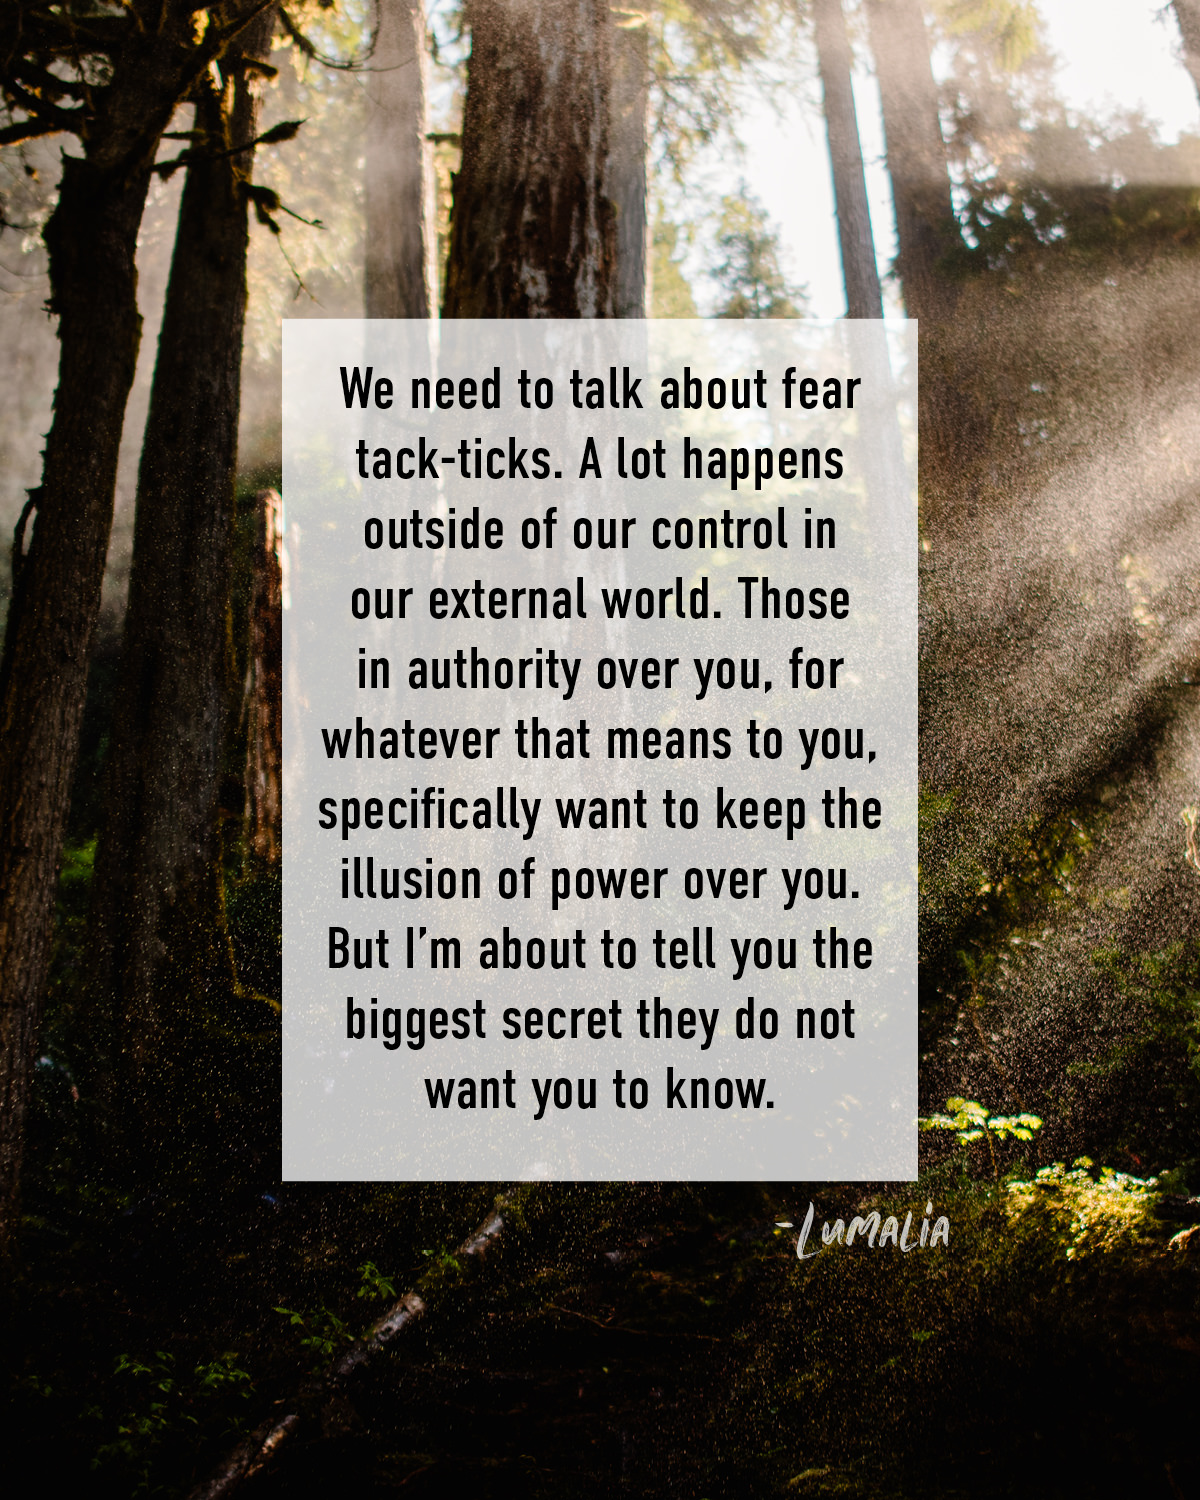 We need to talk about fear tack-ticks. A lot happens outside of our control in our external world. Those in authority over you, for whatever that means to you, specifically want to keep the illusion of power over you. But I’m about to tell you the biggest secret they do not want you to know.